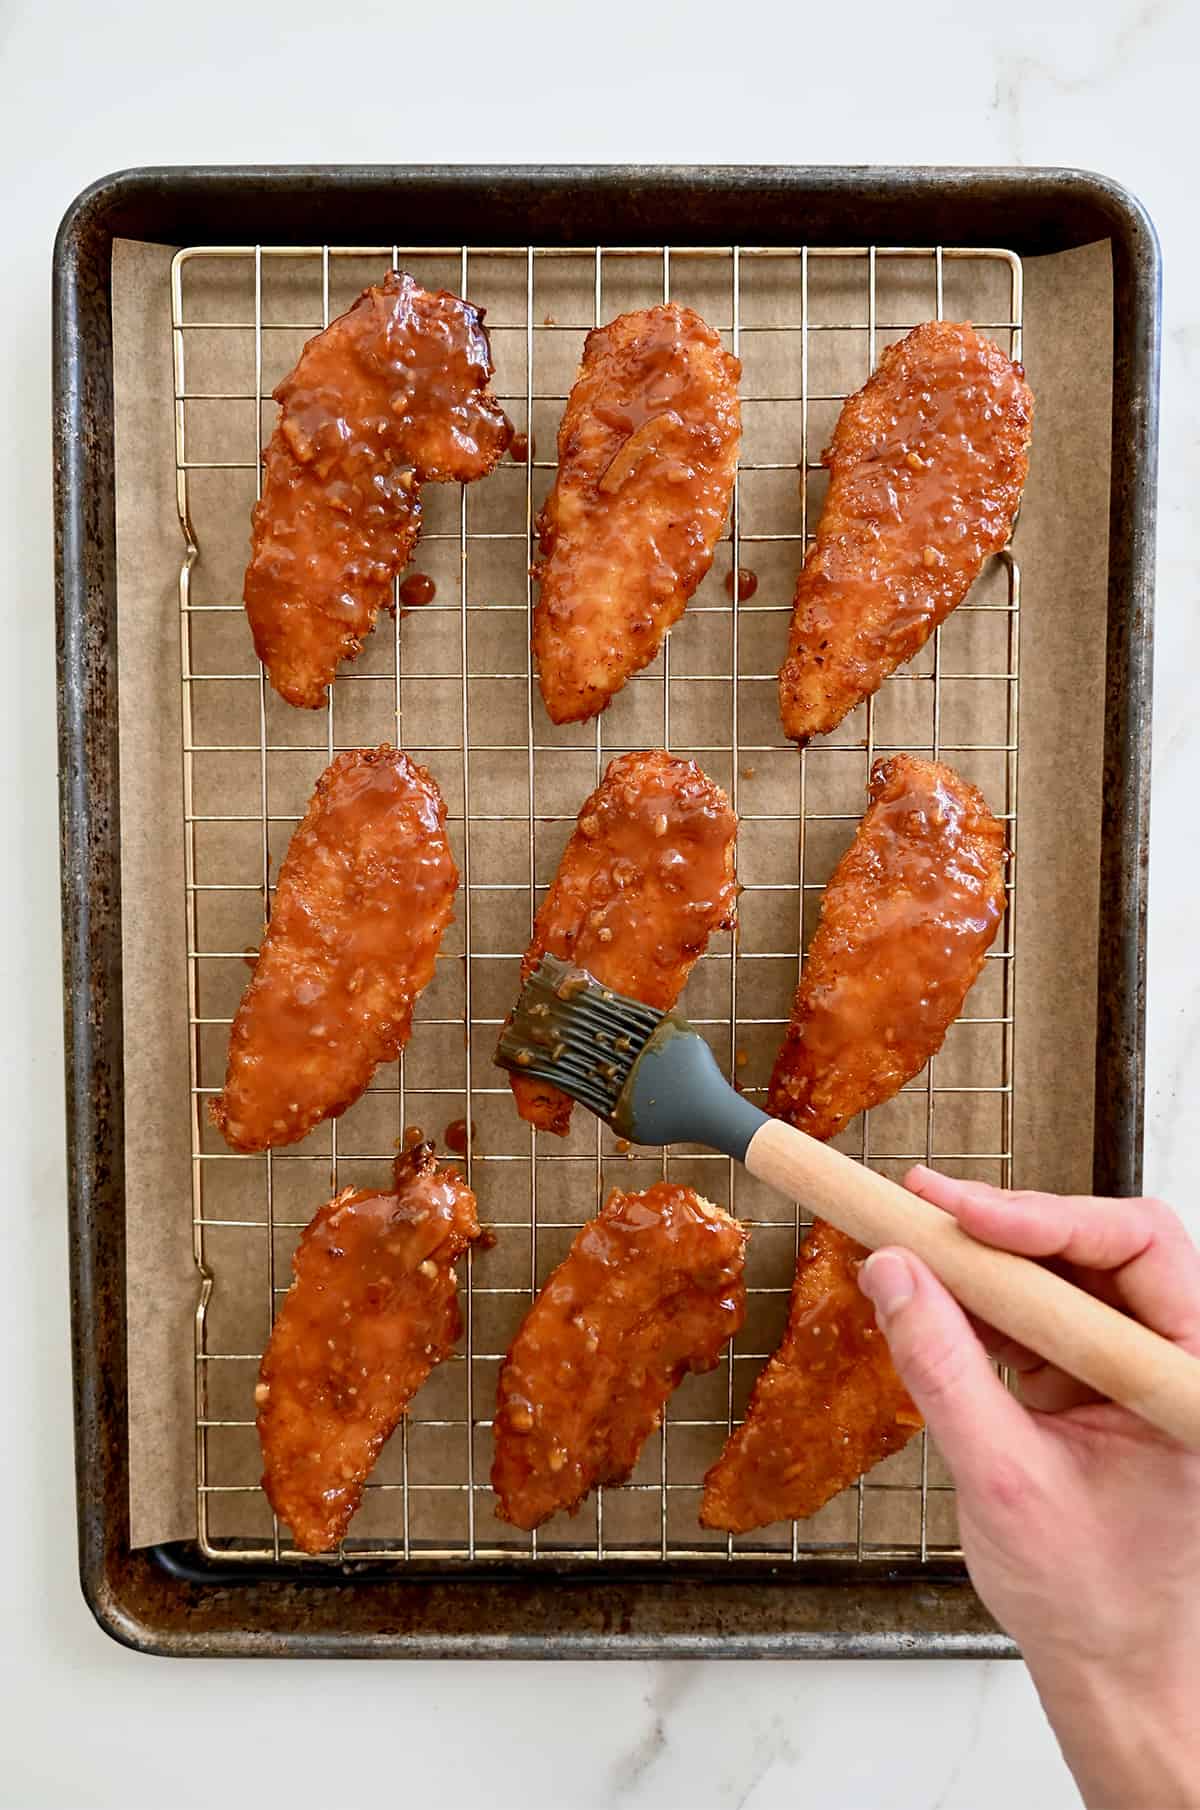 Orange sauce being brushed atop baked chicken tenders on a wire rack on a baking sheet.